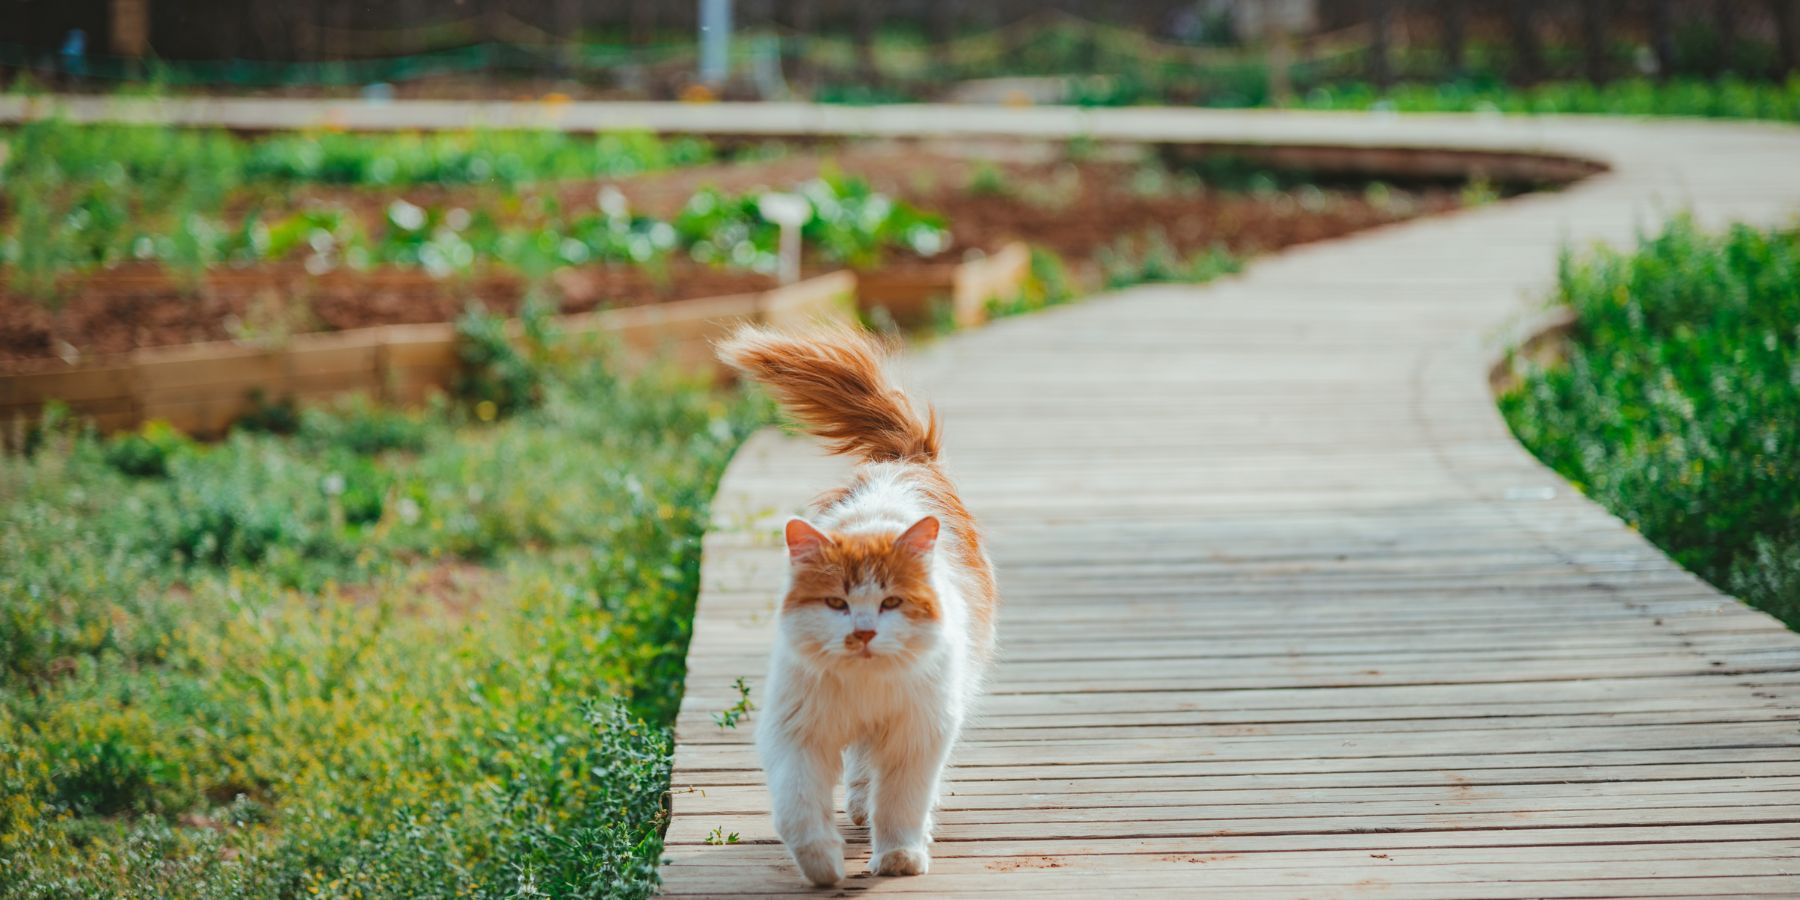 Why Should You Walk Your Cat? Health Benefits Explained